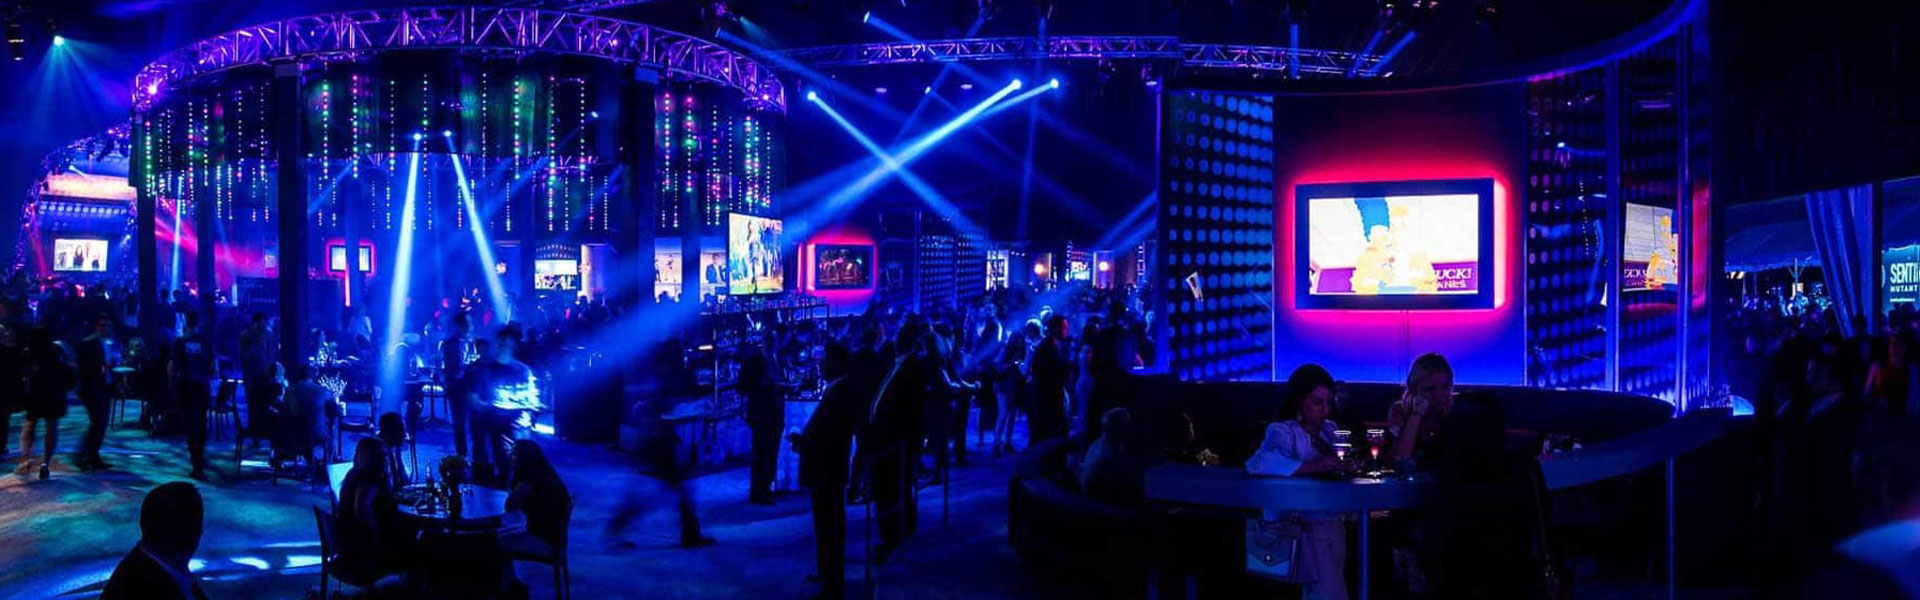 Large indoor catered corporate event with blue lighting